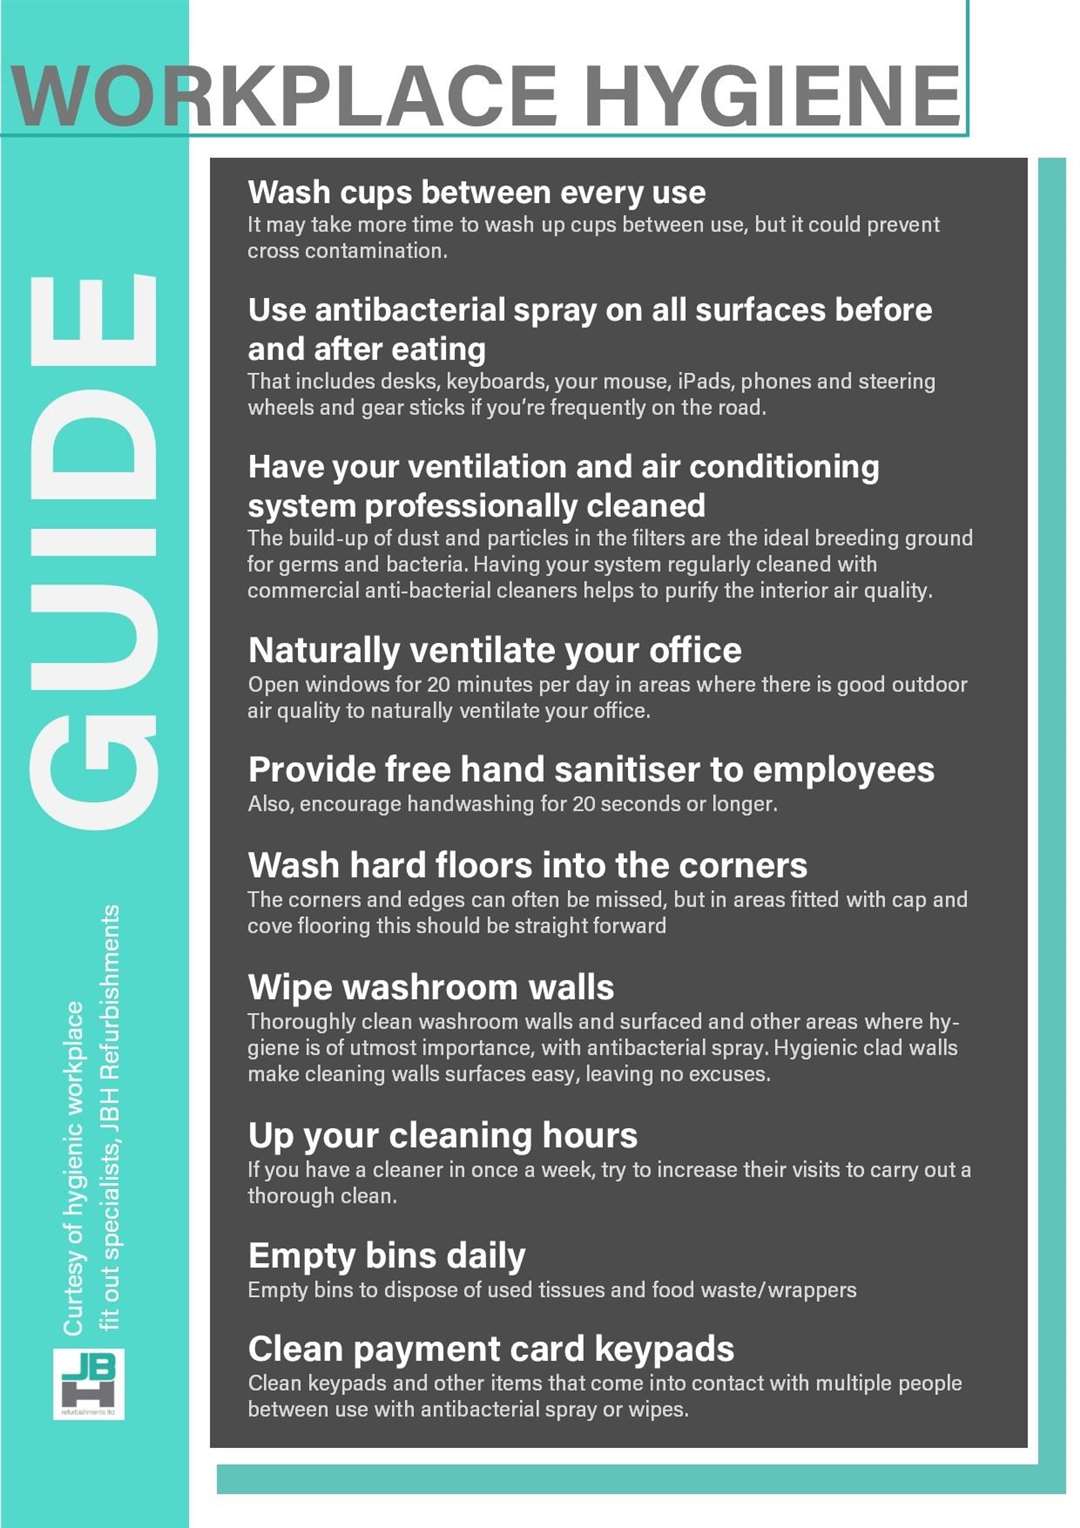 JBH Refurbishment's guide to hygiene in the workplace